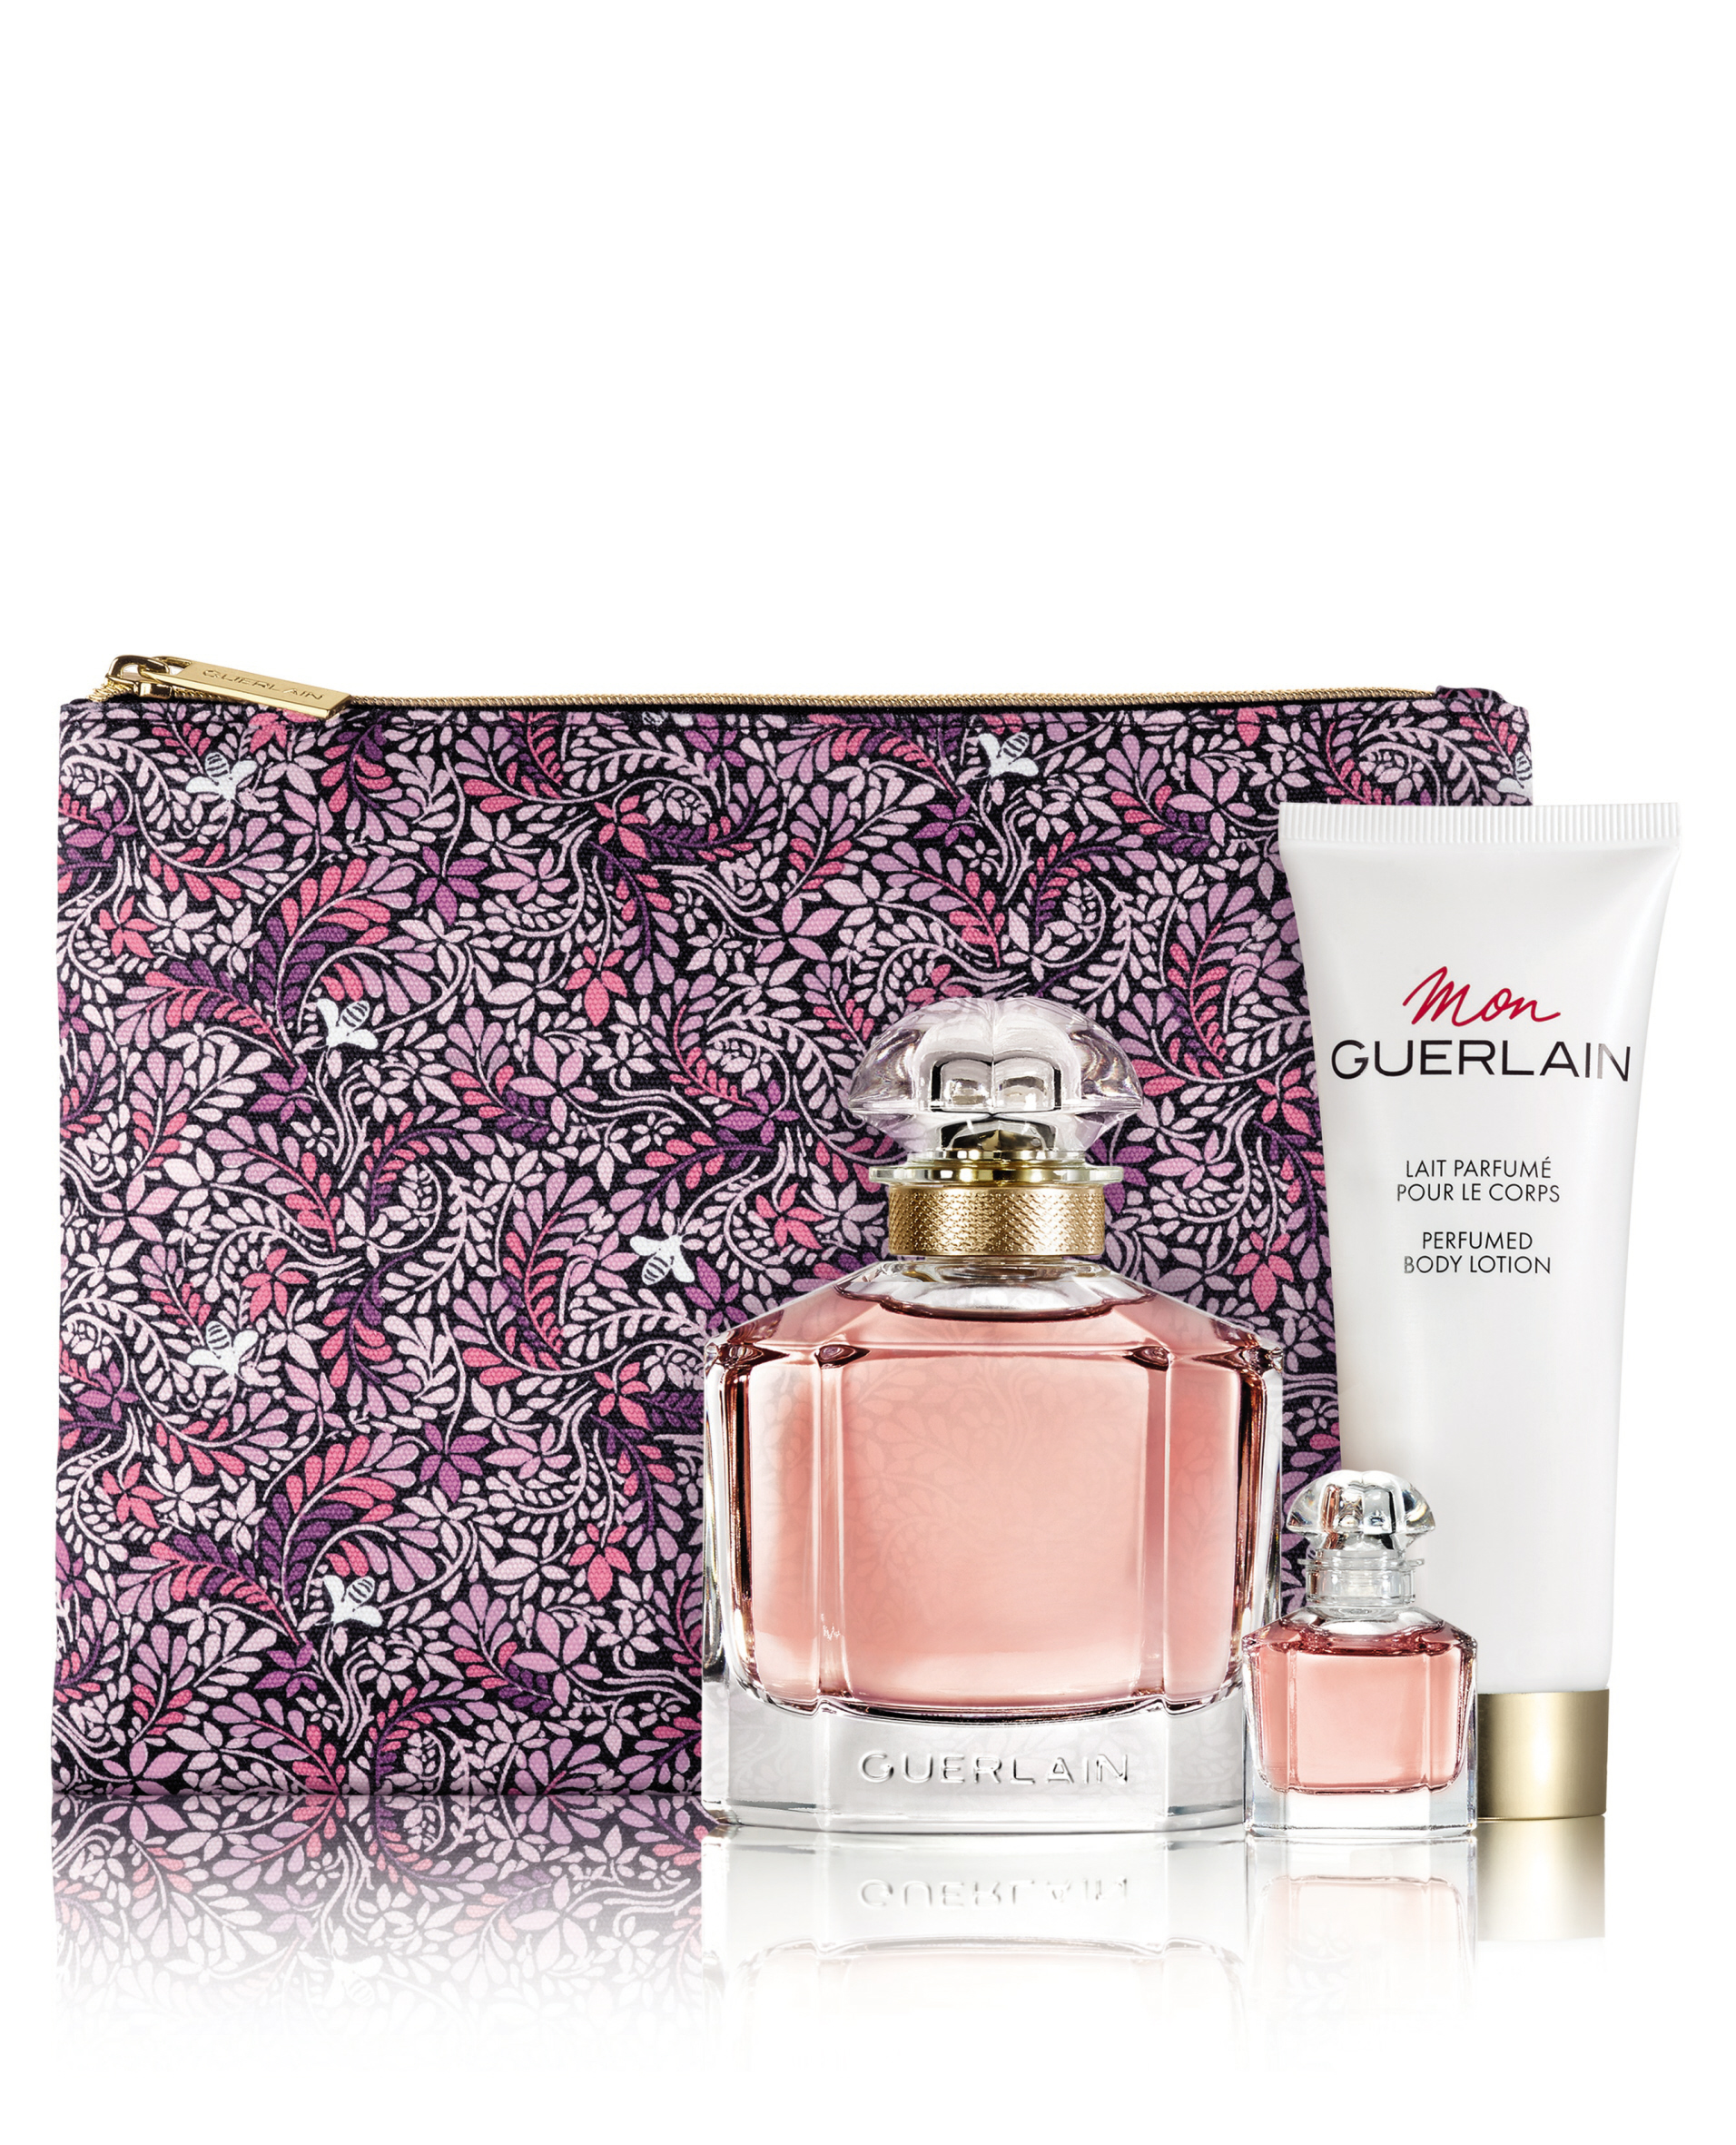 Guerlain's iconic bottle will be a gorgeous addition to her beauty boudoir